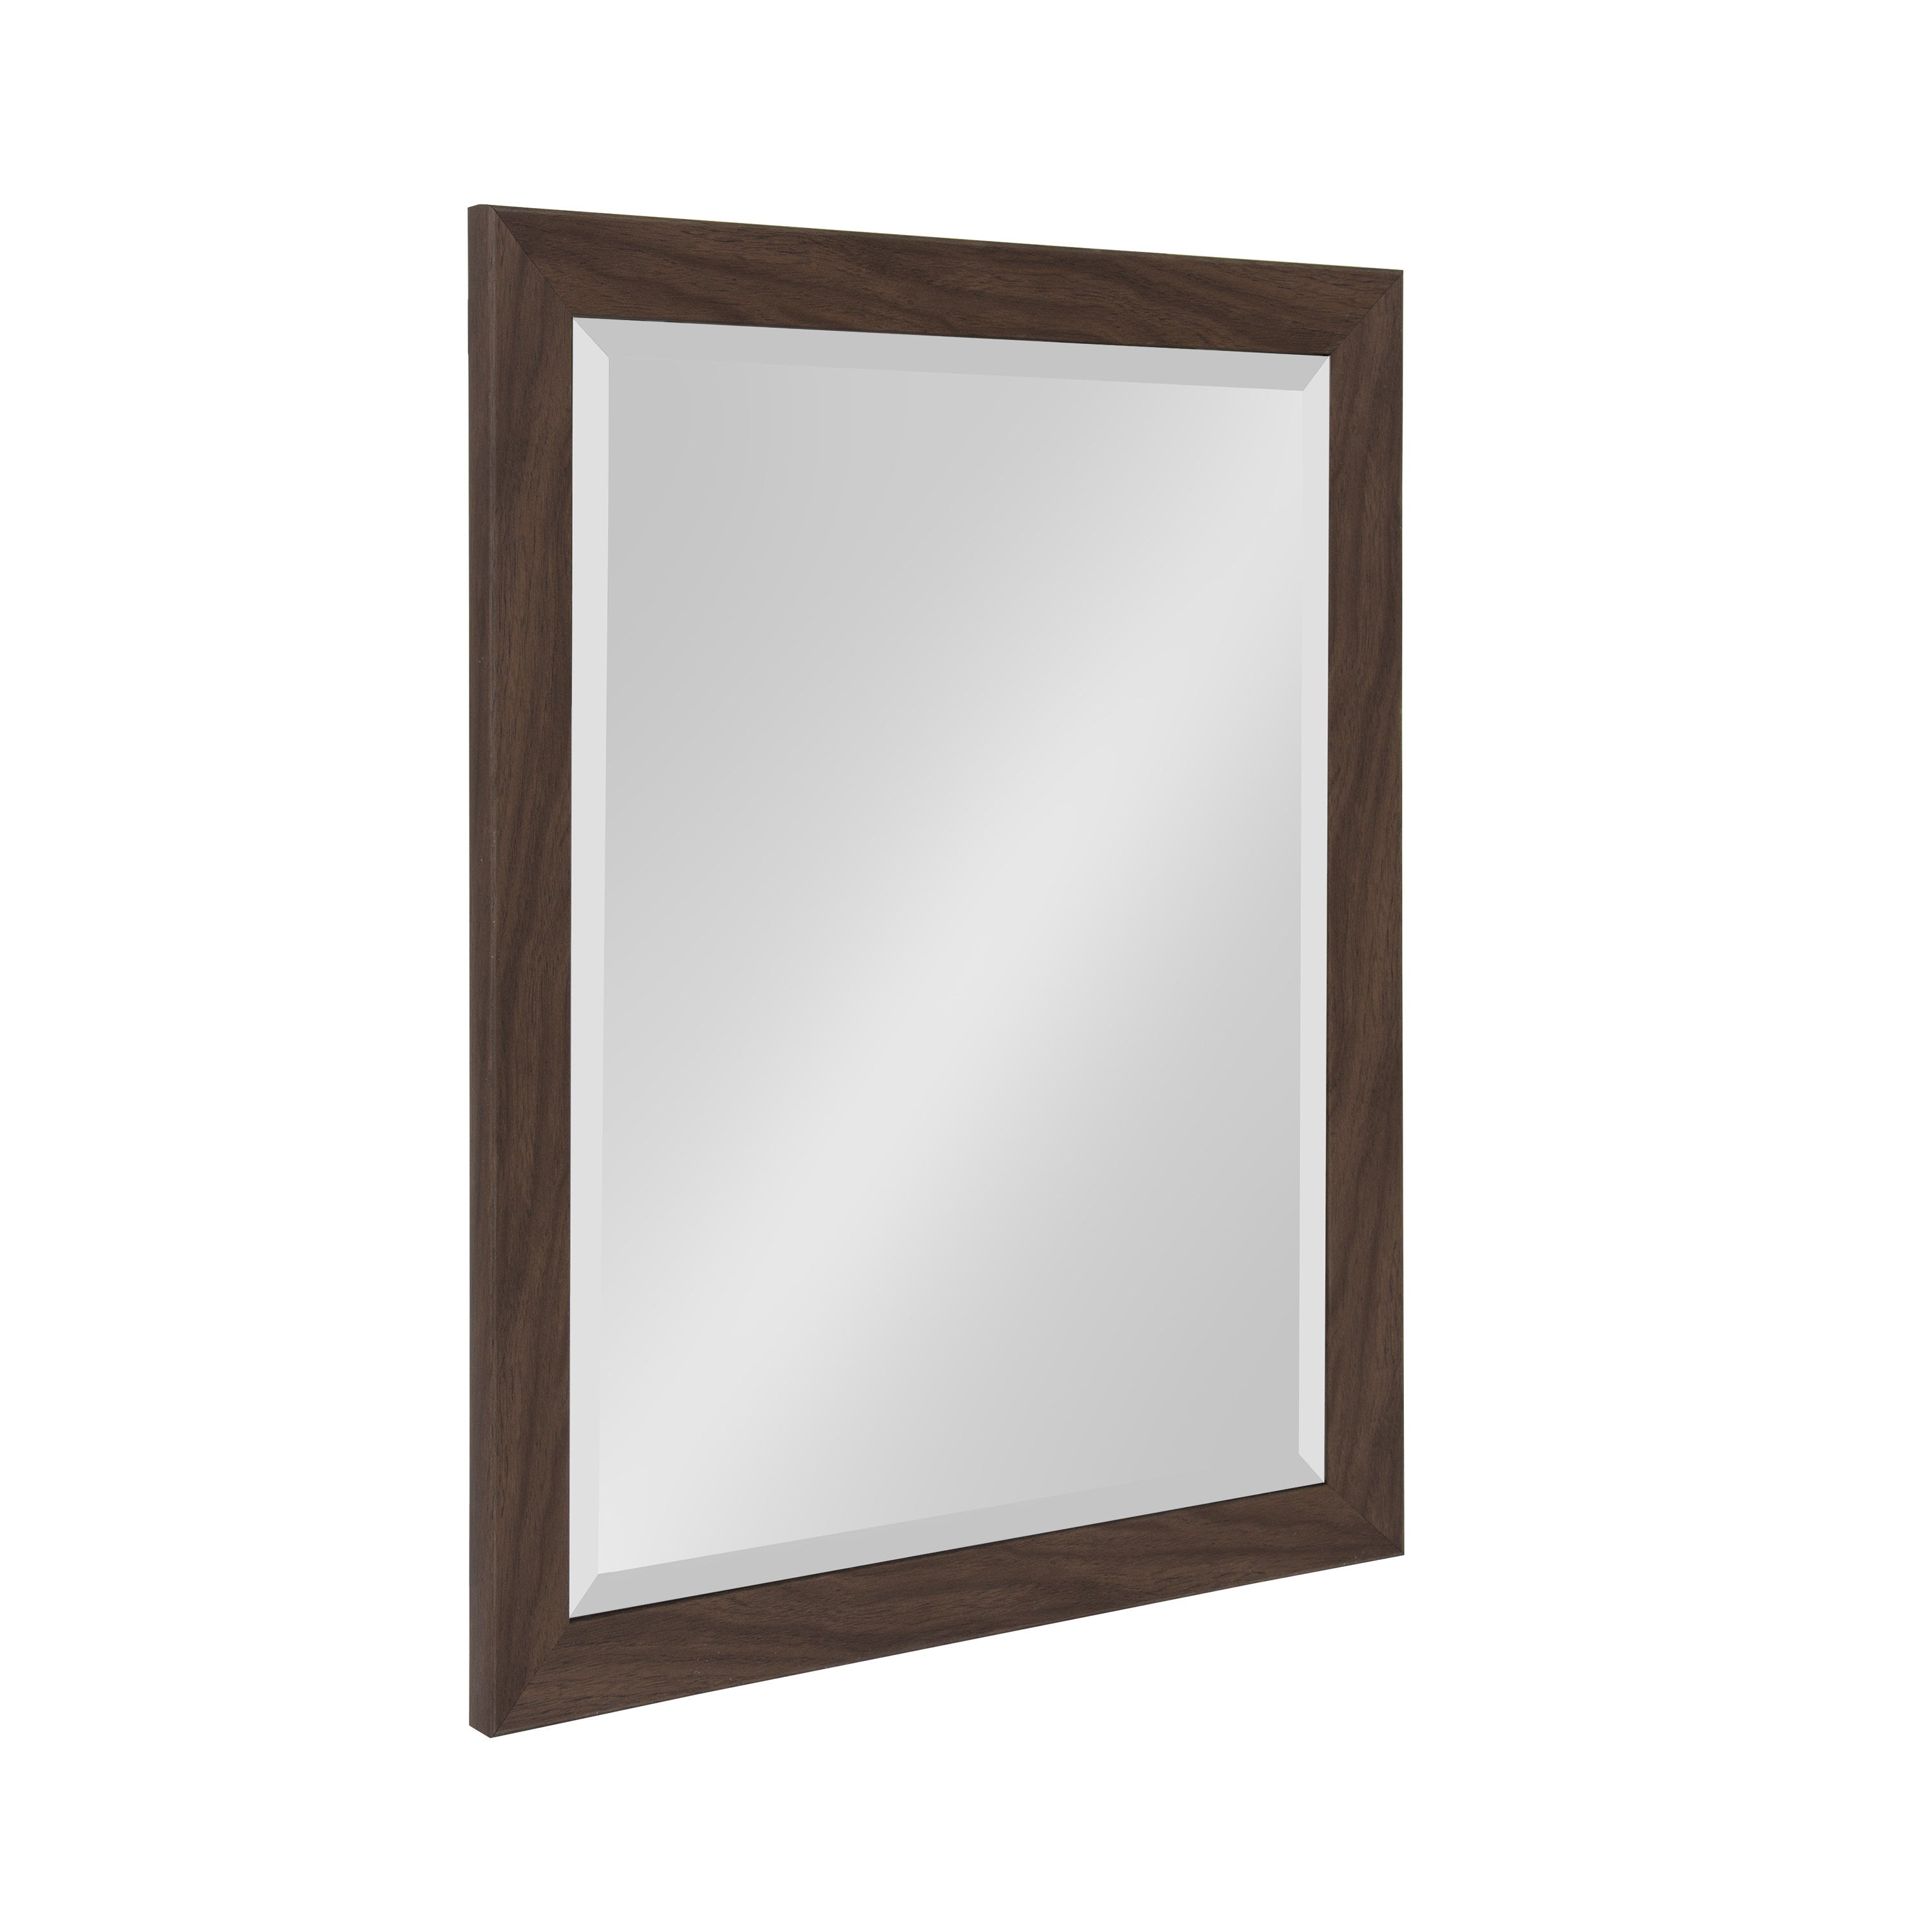 Beatrice Framed Wall Mirror